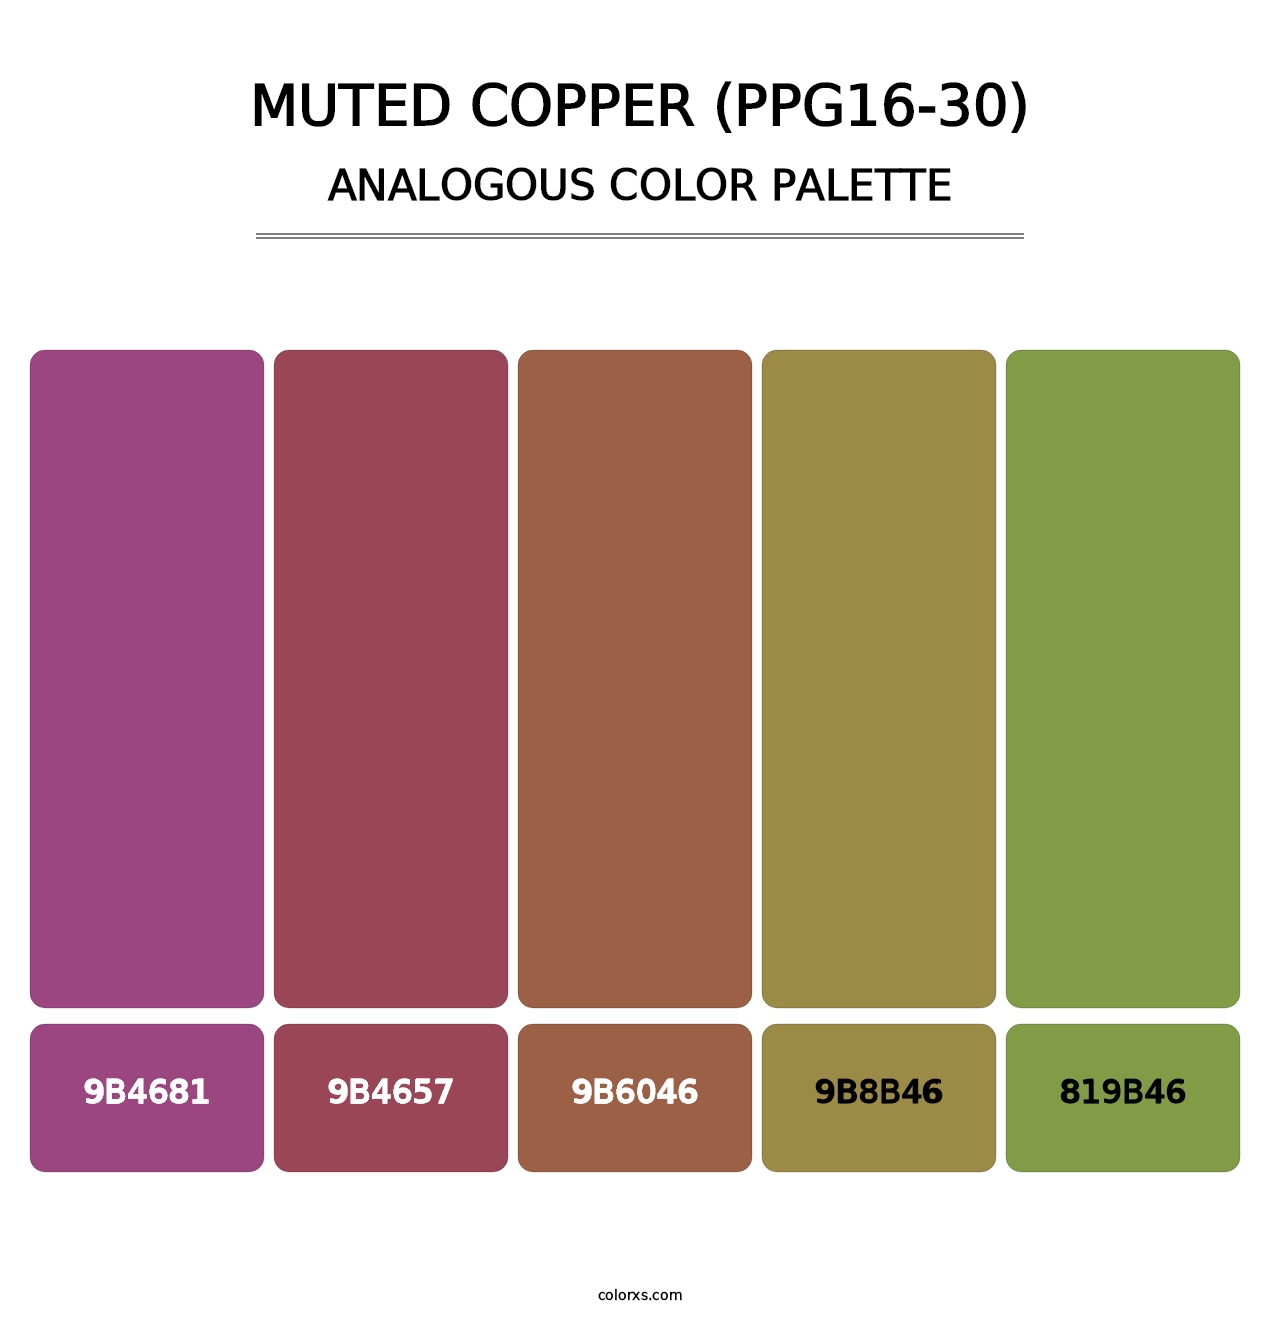 Muted Copper (PPG16-30) - Analogous Color Palette